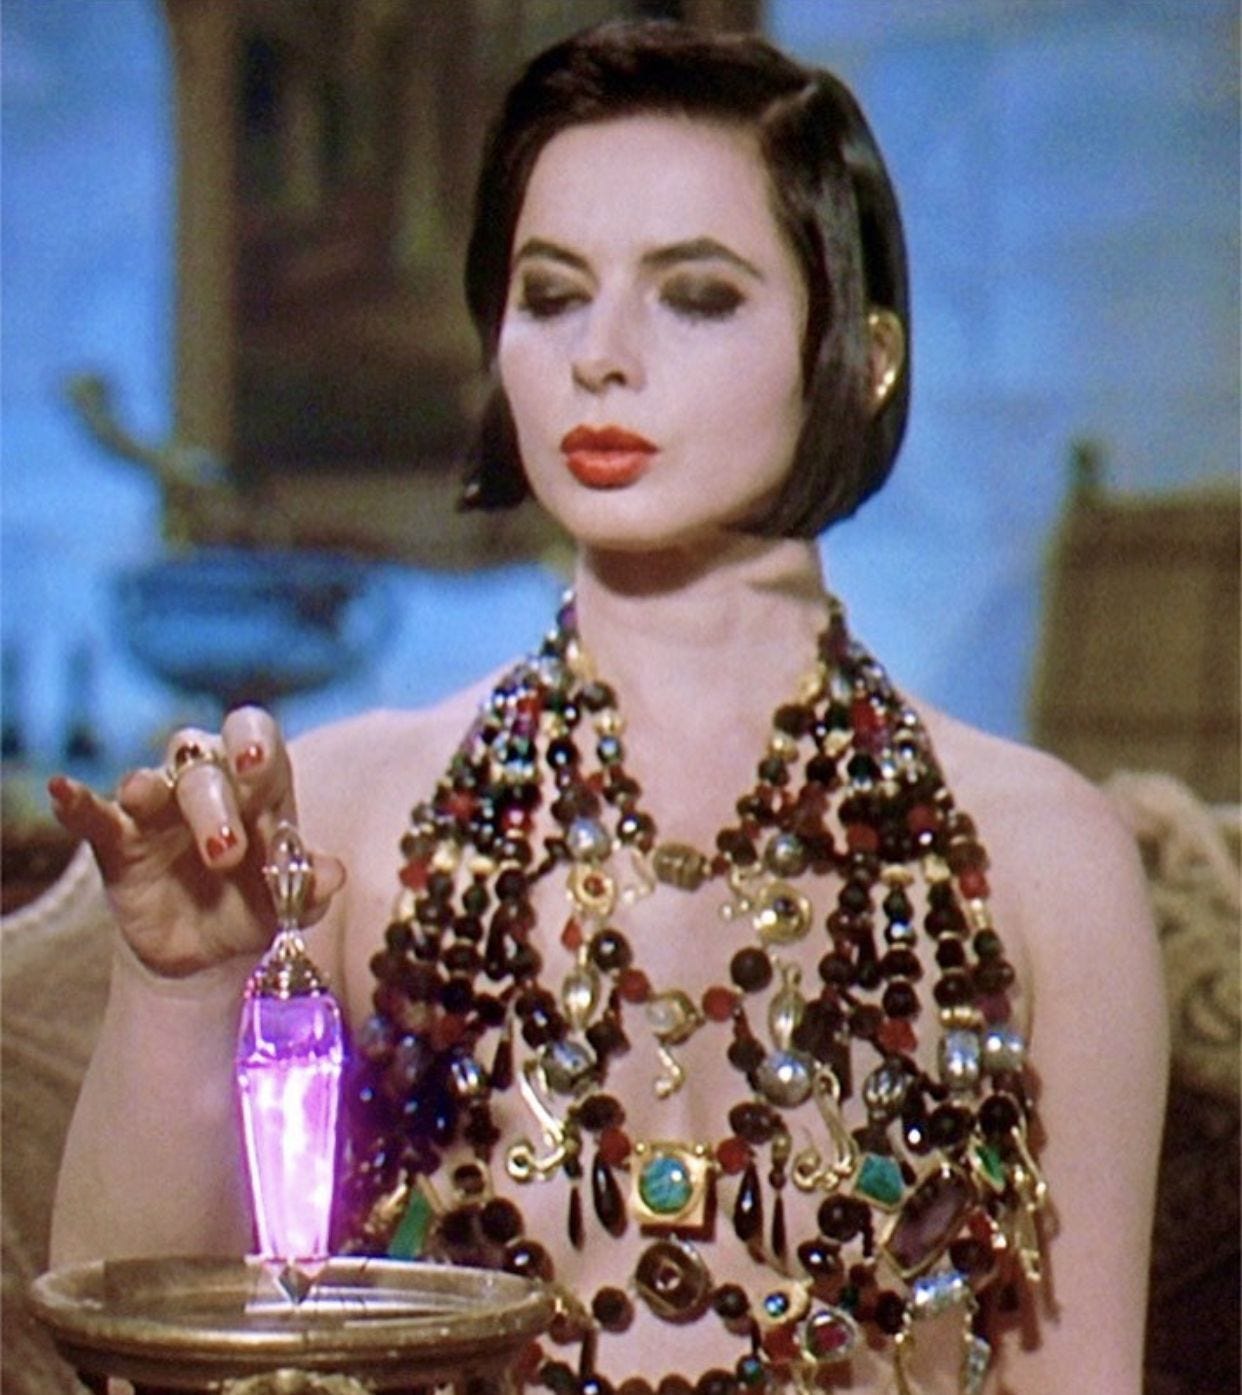 Булма on Twitter: "Isabella Rossellini in Death becomes her. That's it.  That's the tweet. https://t.co/SG84DhKApF" / Twitter